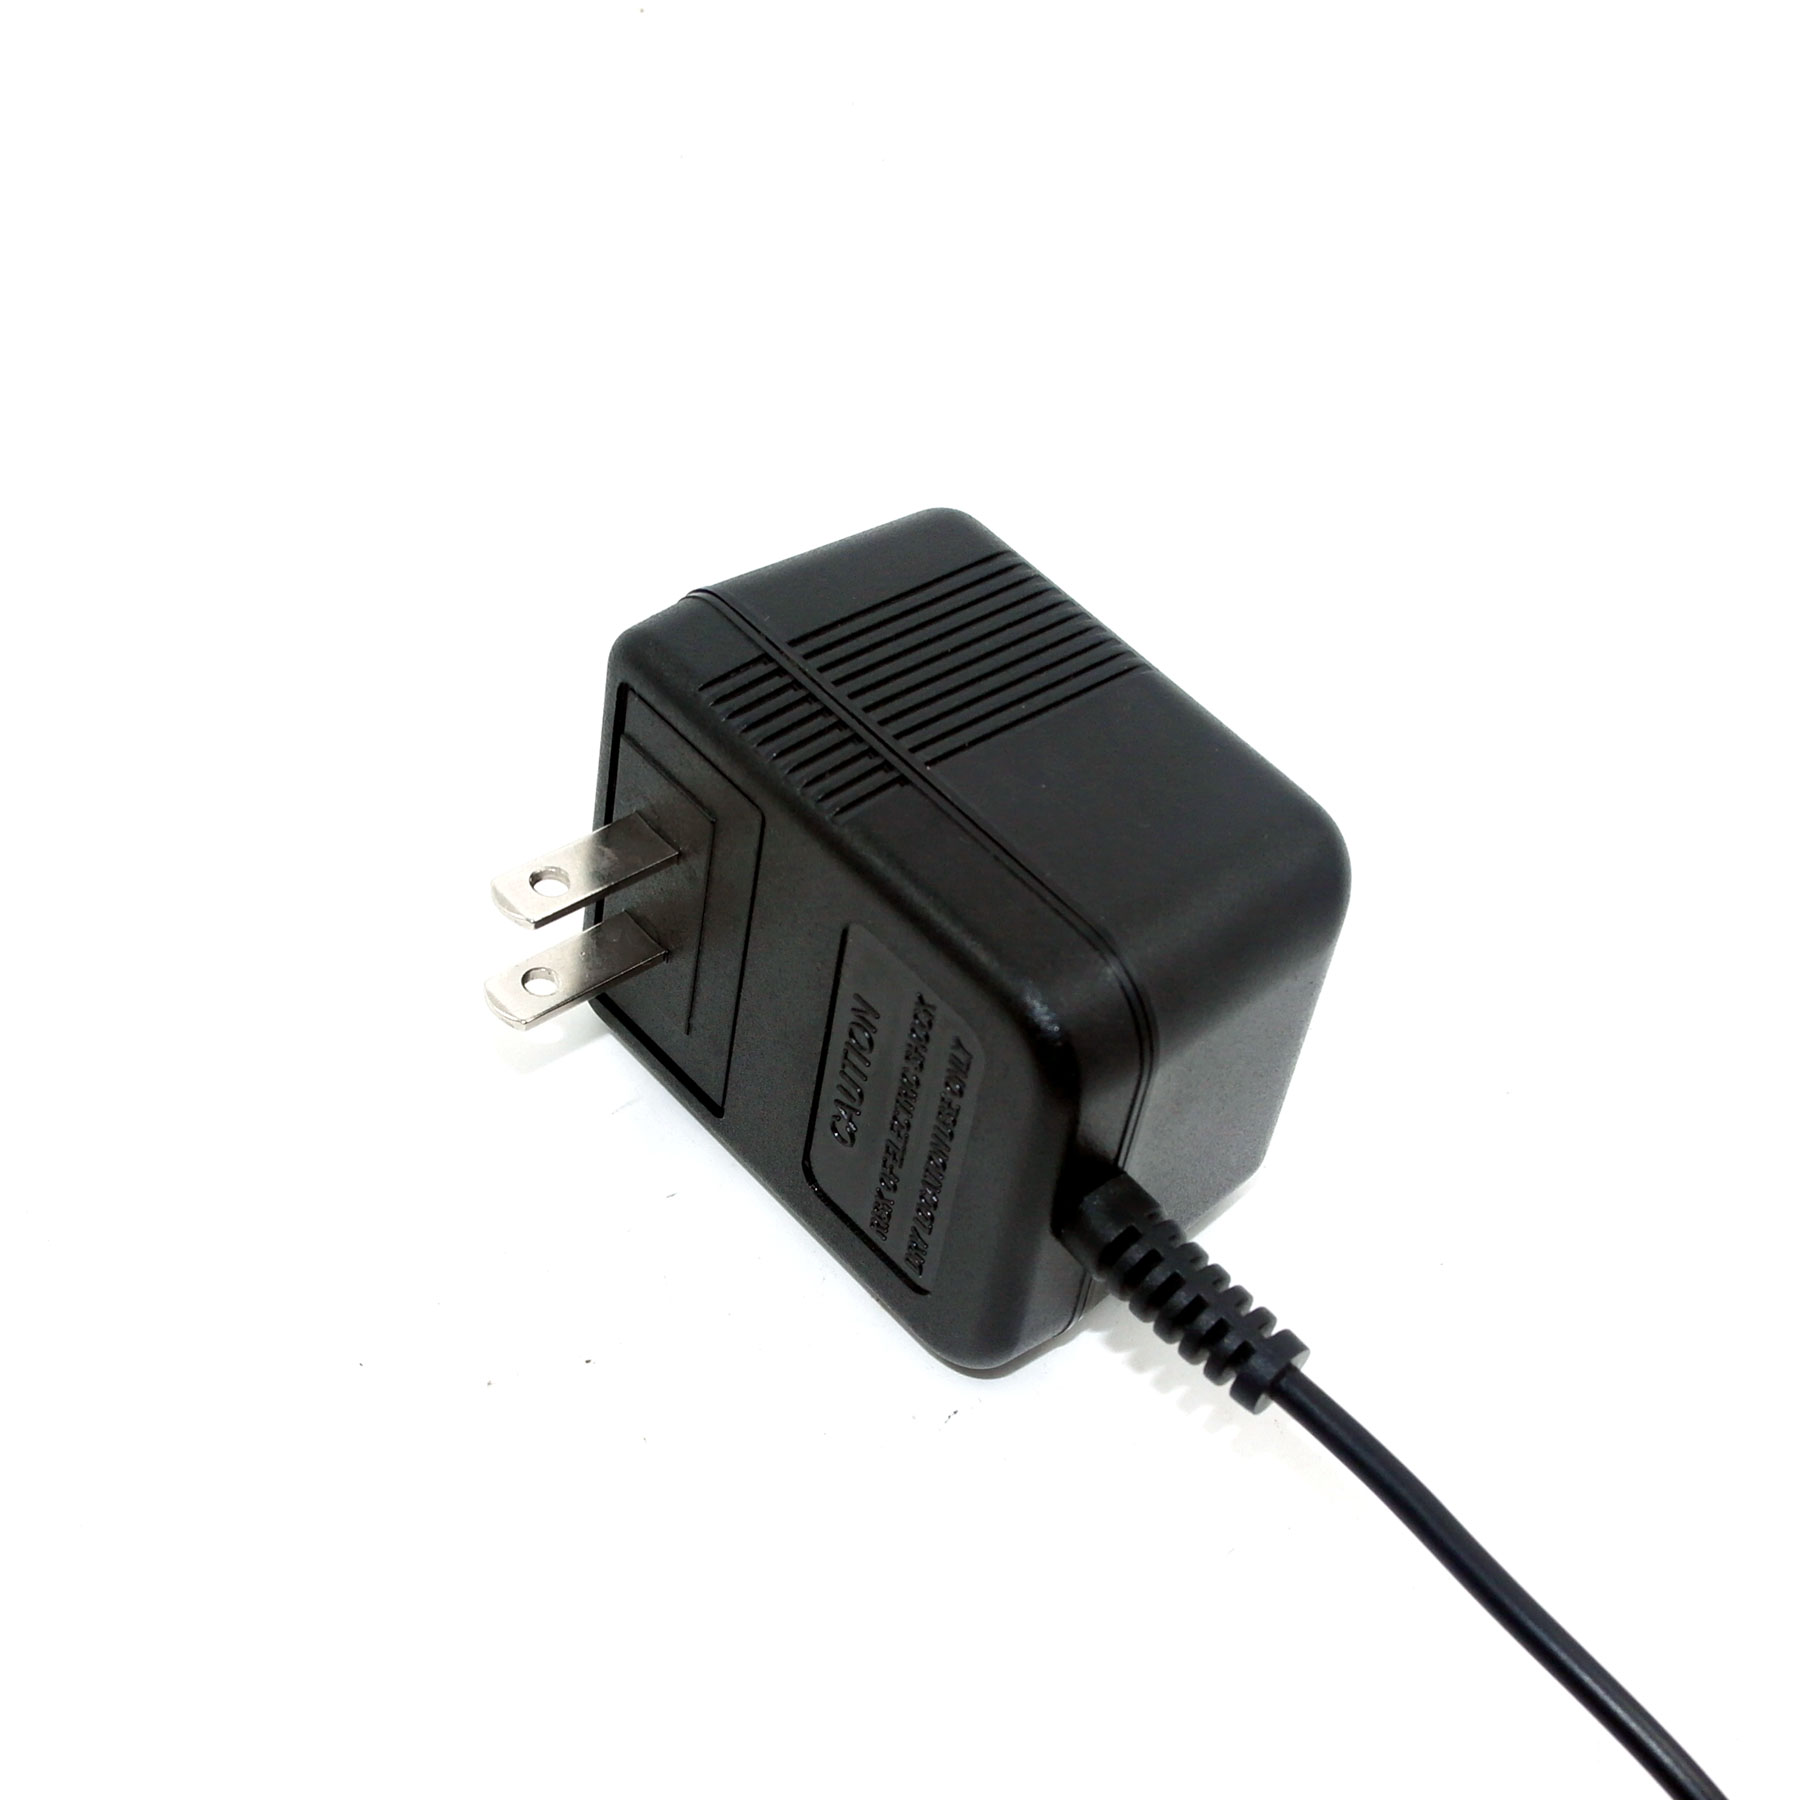 36VDC 150mA linear power adapter